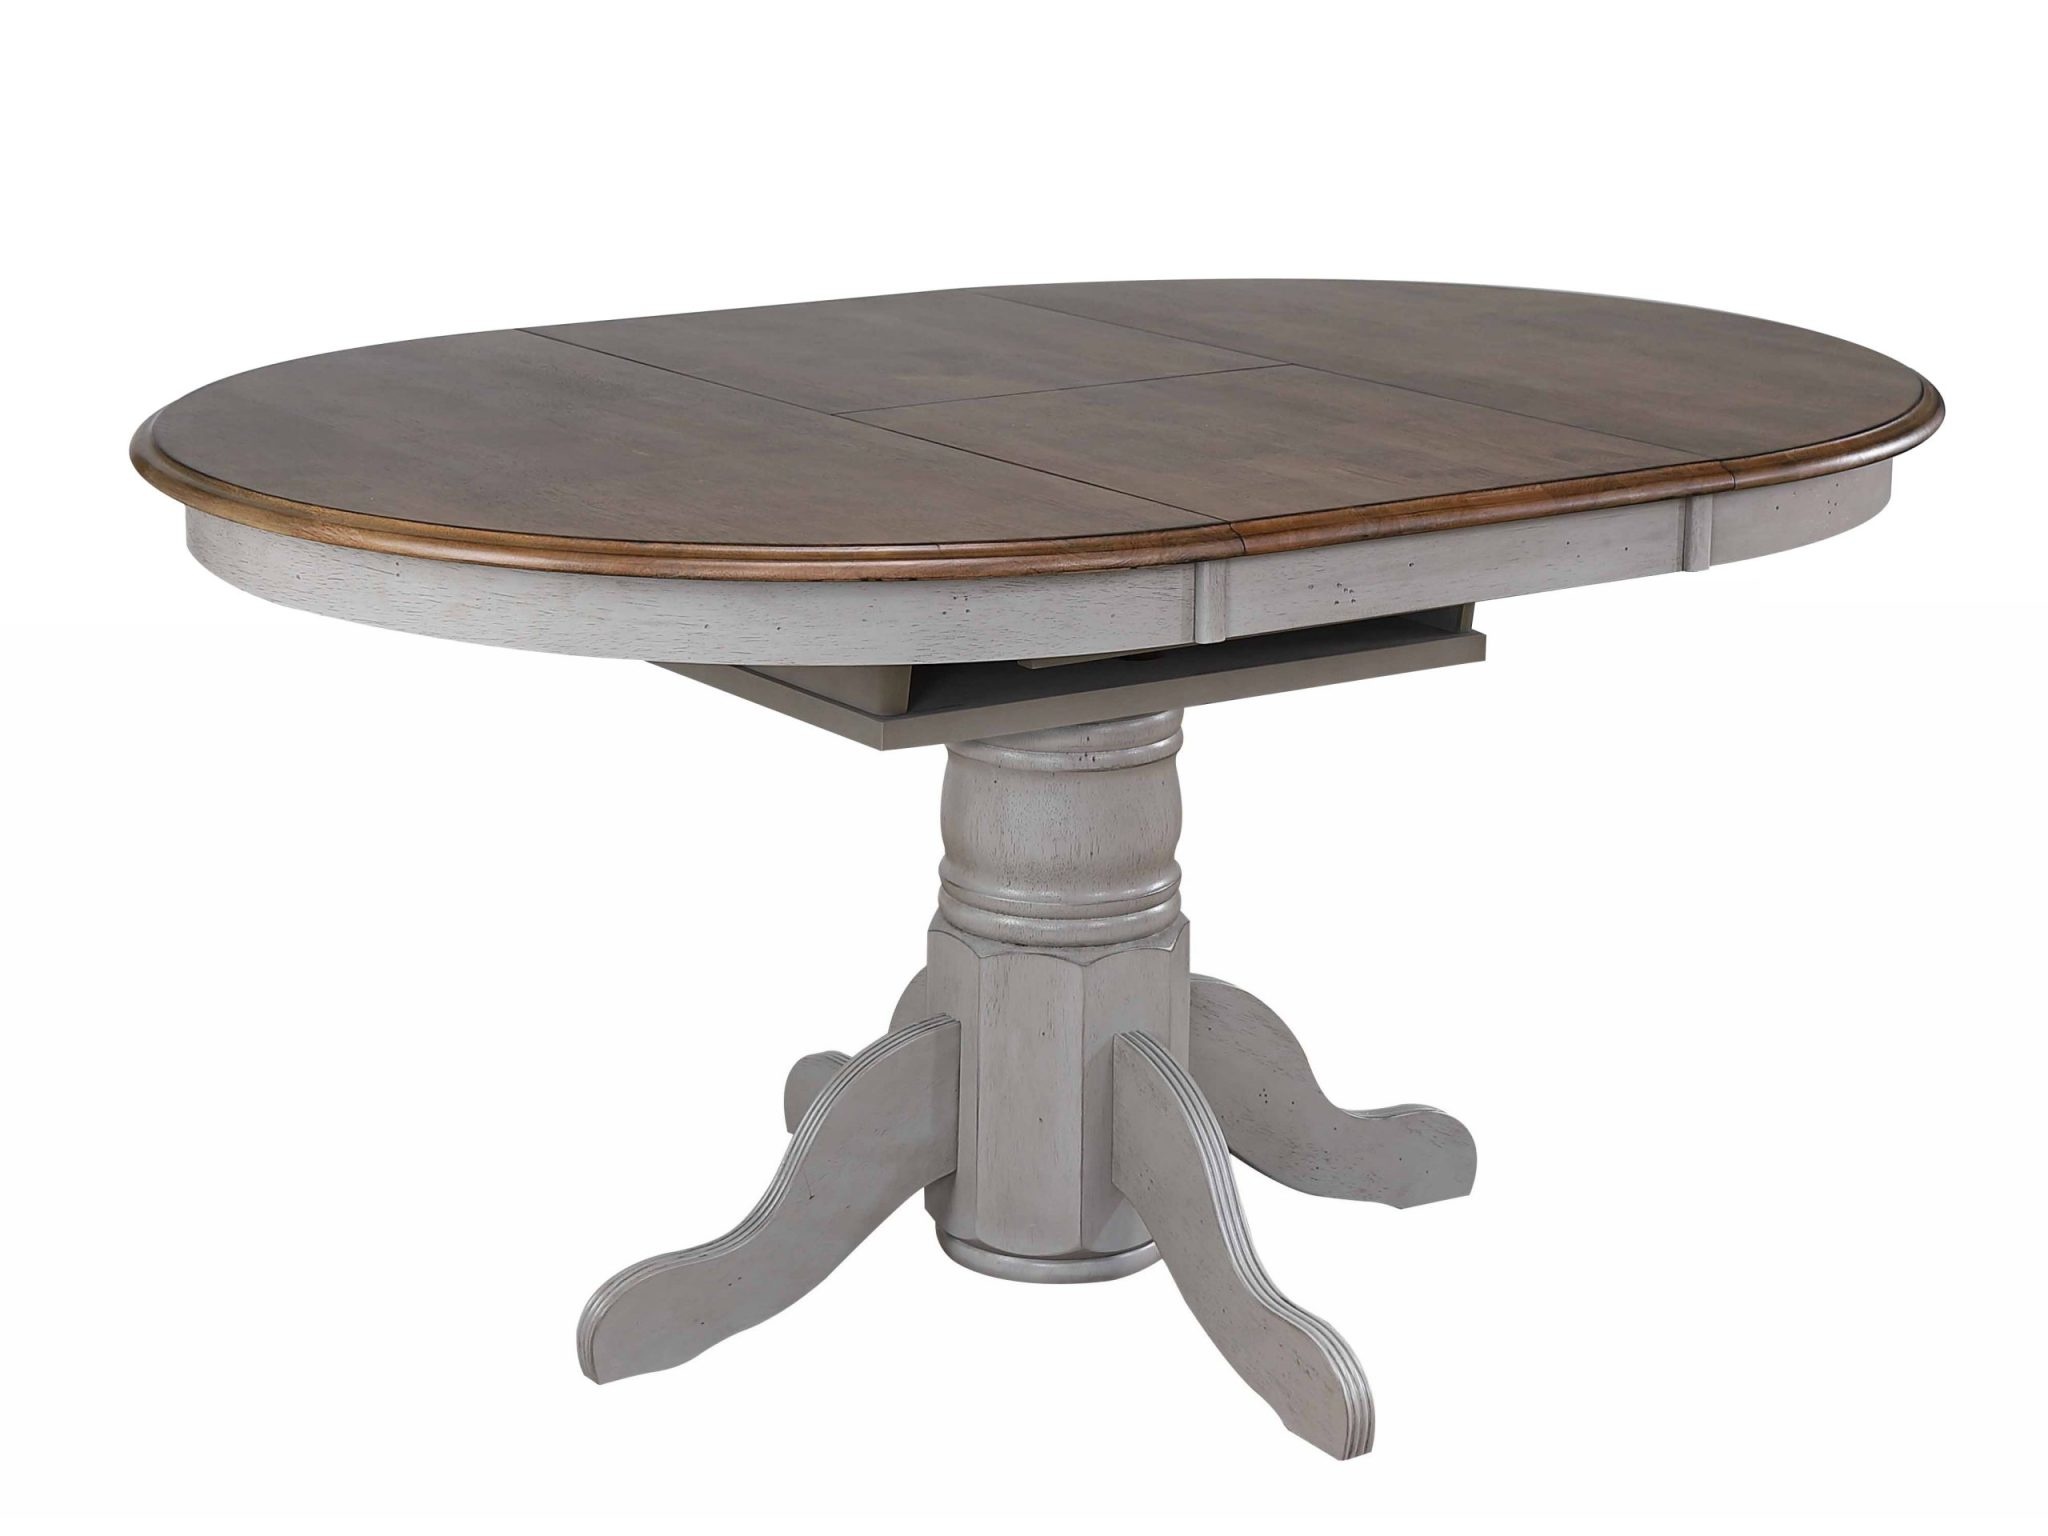 Dlu Cg4260 Go Round Or Oval Extendable Dining Table Distressed Gray And Brown Wood Wholesale Furniture Mattress